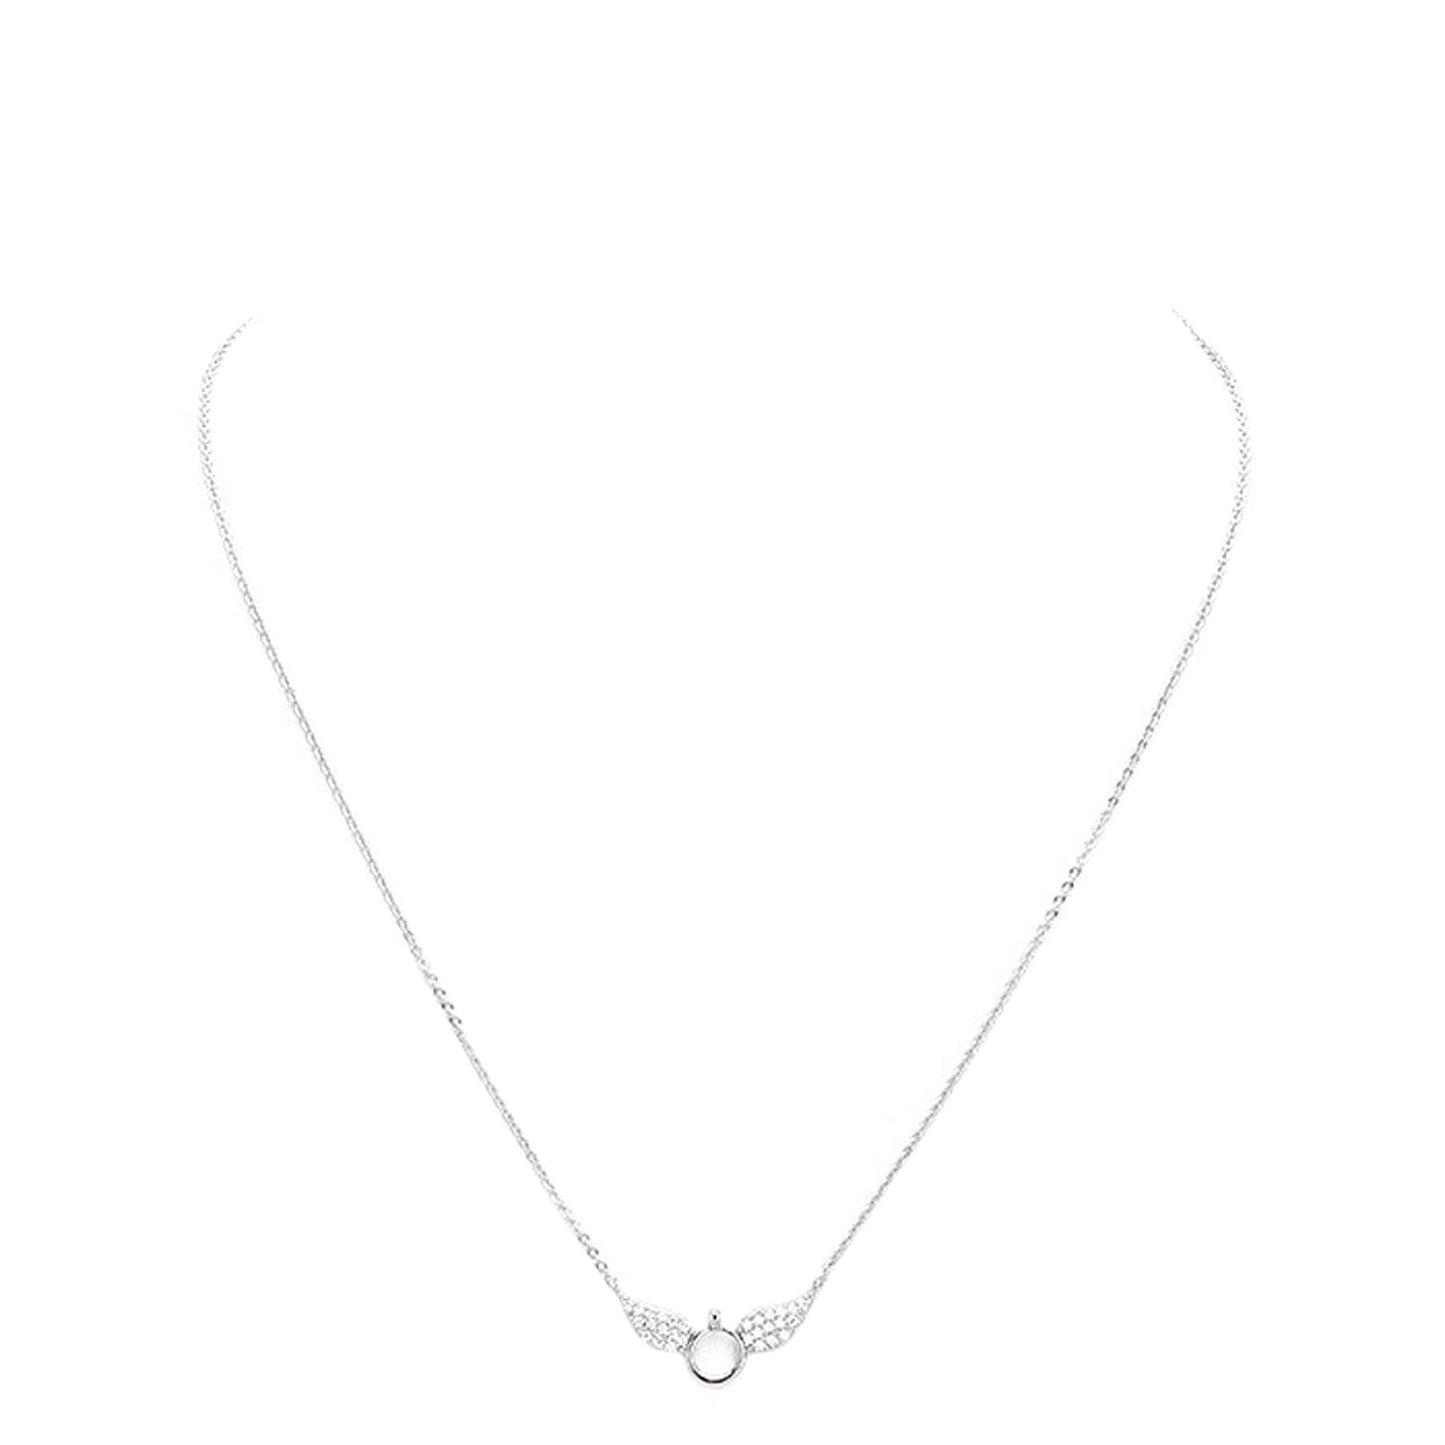 Rhodium White Gold Dipped Cubic Zirconia Wings Pendant Necklace. Get ready with these Necklace, put on a pop of color to complete your ensemble. Perfect for adding just the right amount of shimmer & shine and a touch of class to special events. This  Necklace is the ideal present for all the unique ladies in your life.